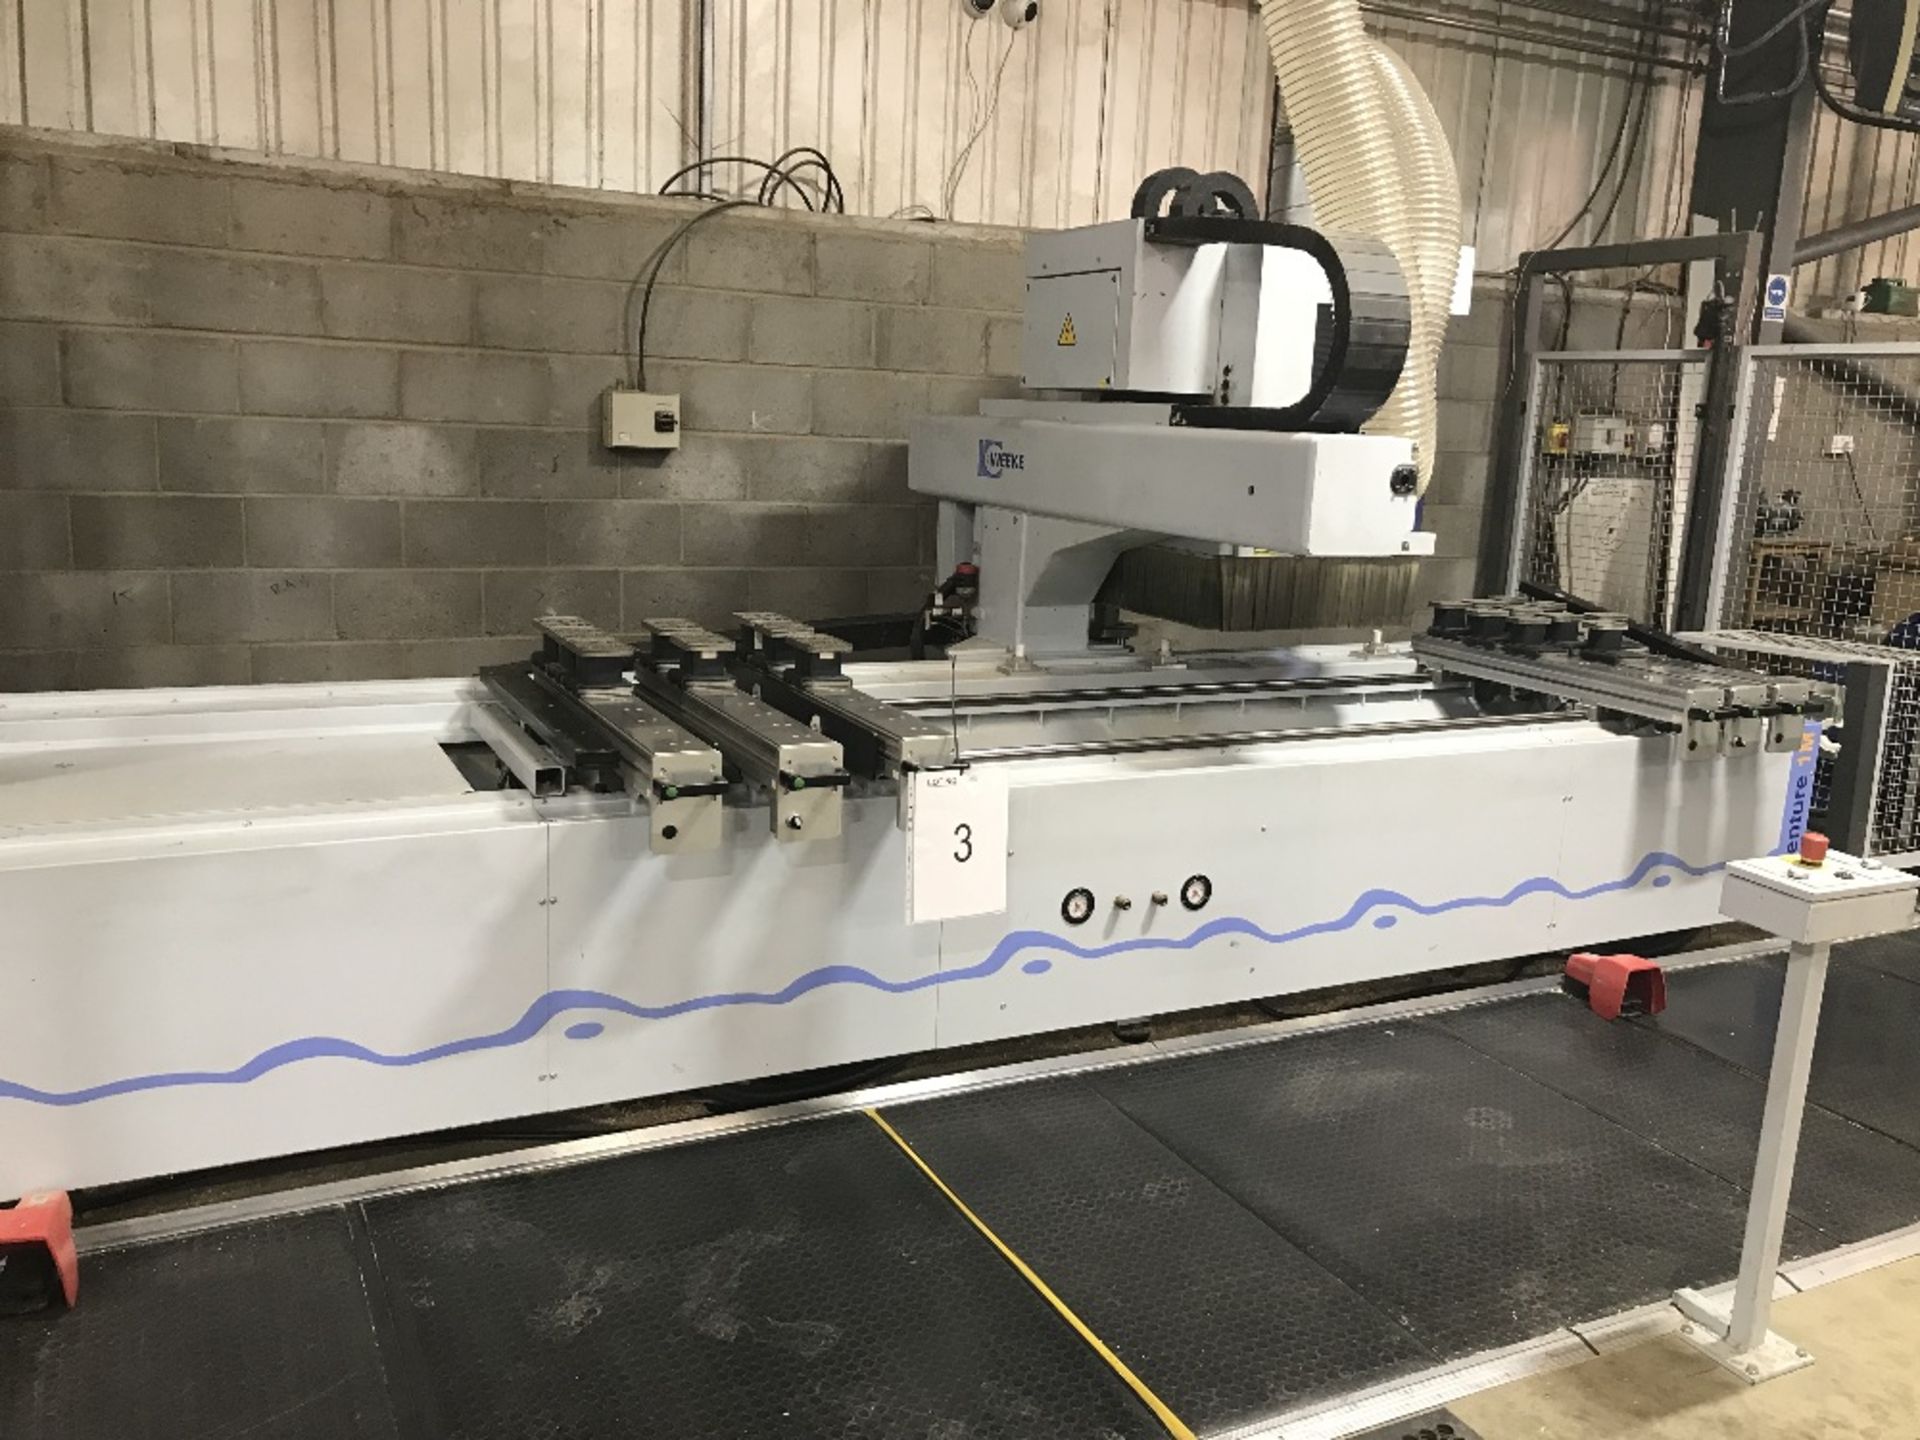 Weeke Type Optimat BHC Venture 1M CNC Machining Centre c/w 6 position automatic tool changer - Image 2 of 5